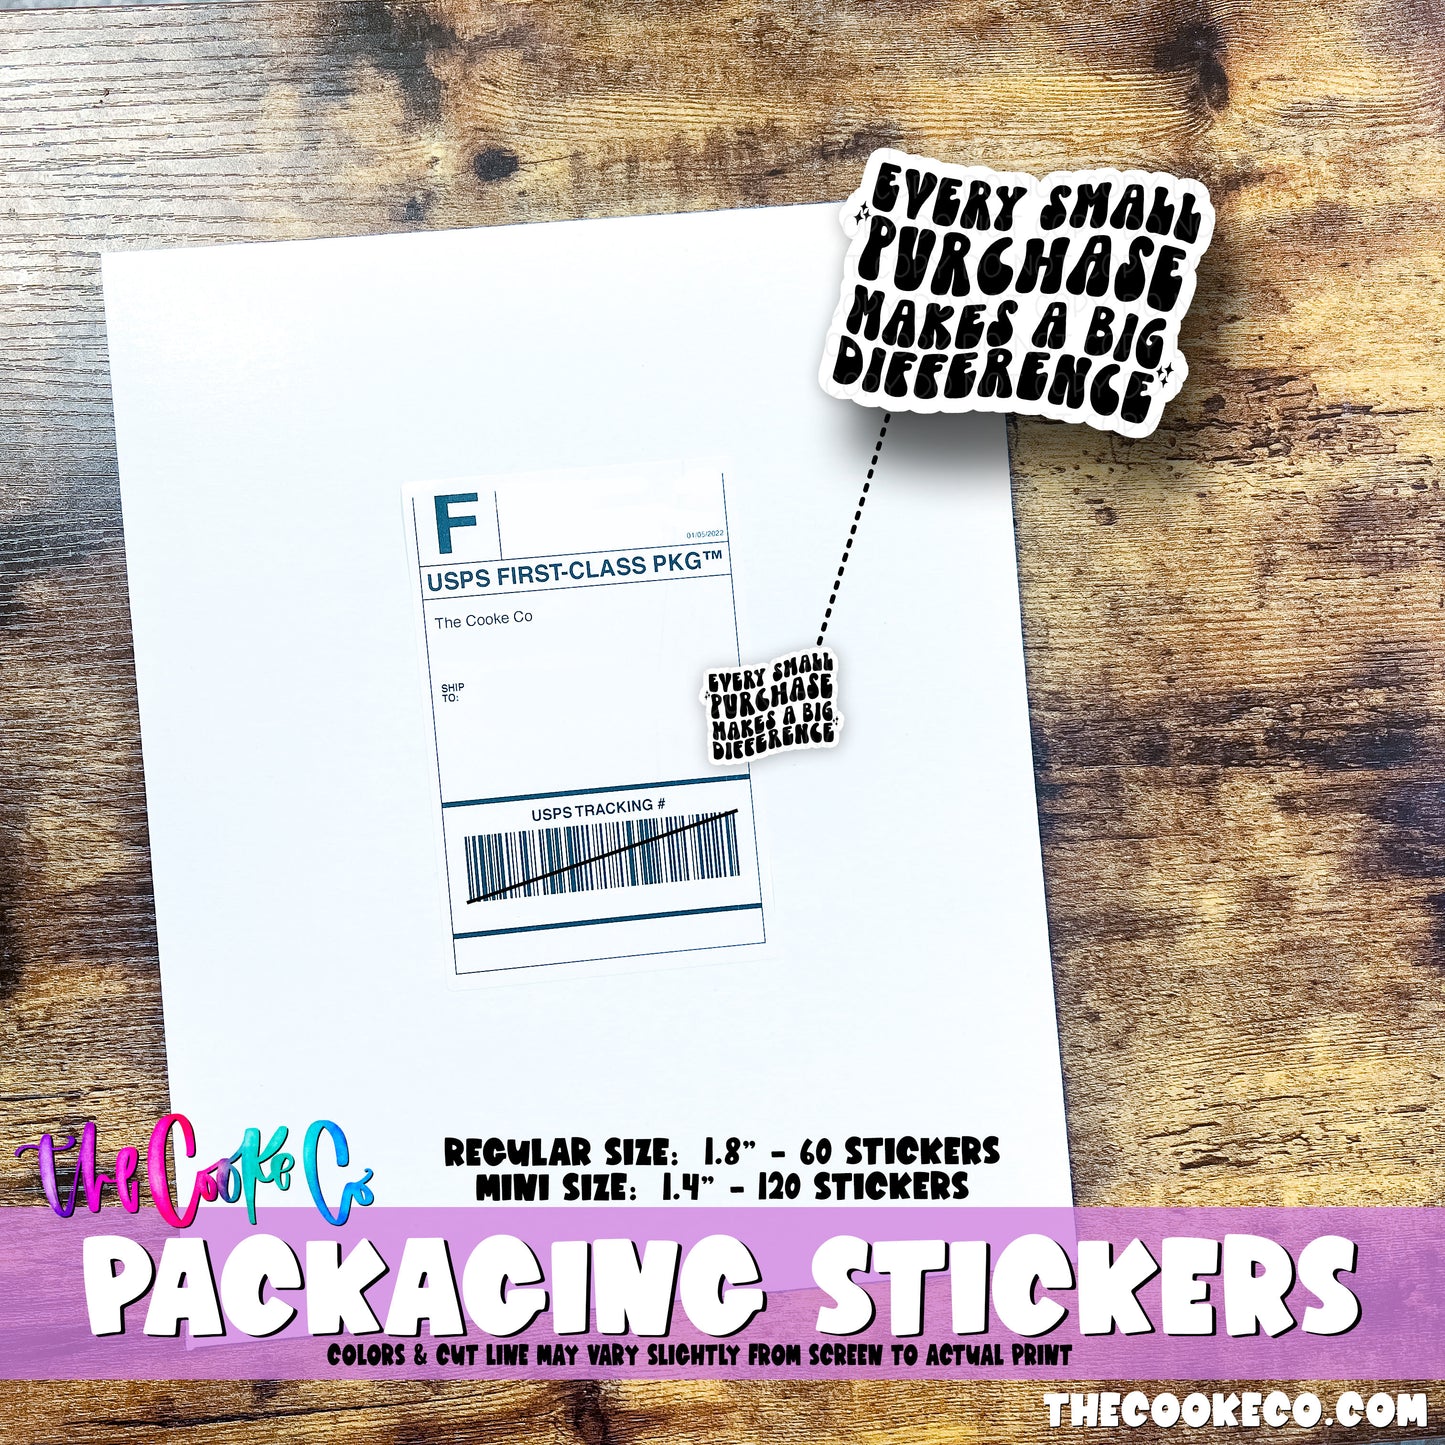 PTO Packaging Stickers | #BW0208 - EVERY SMALL PURCHASE MAKES A BIG DIFFERENCE